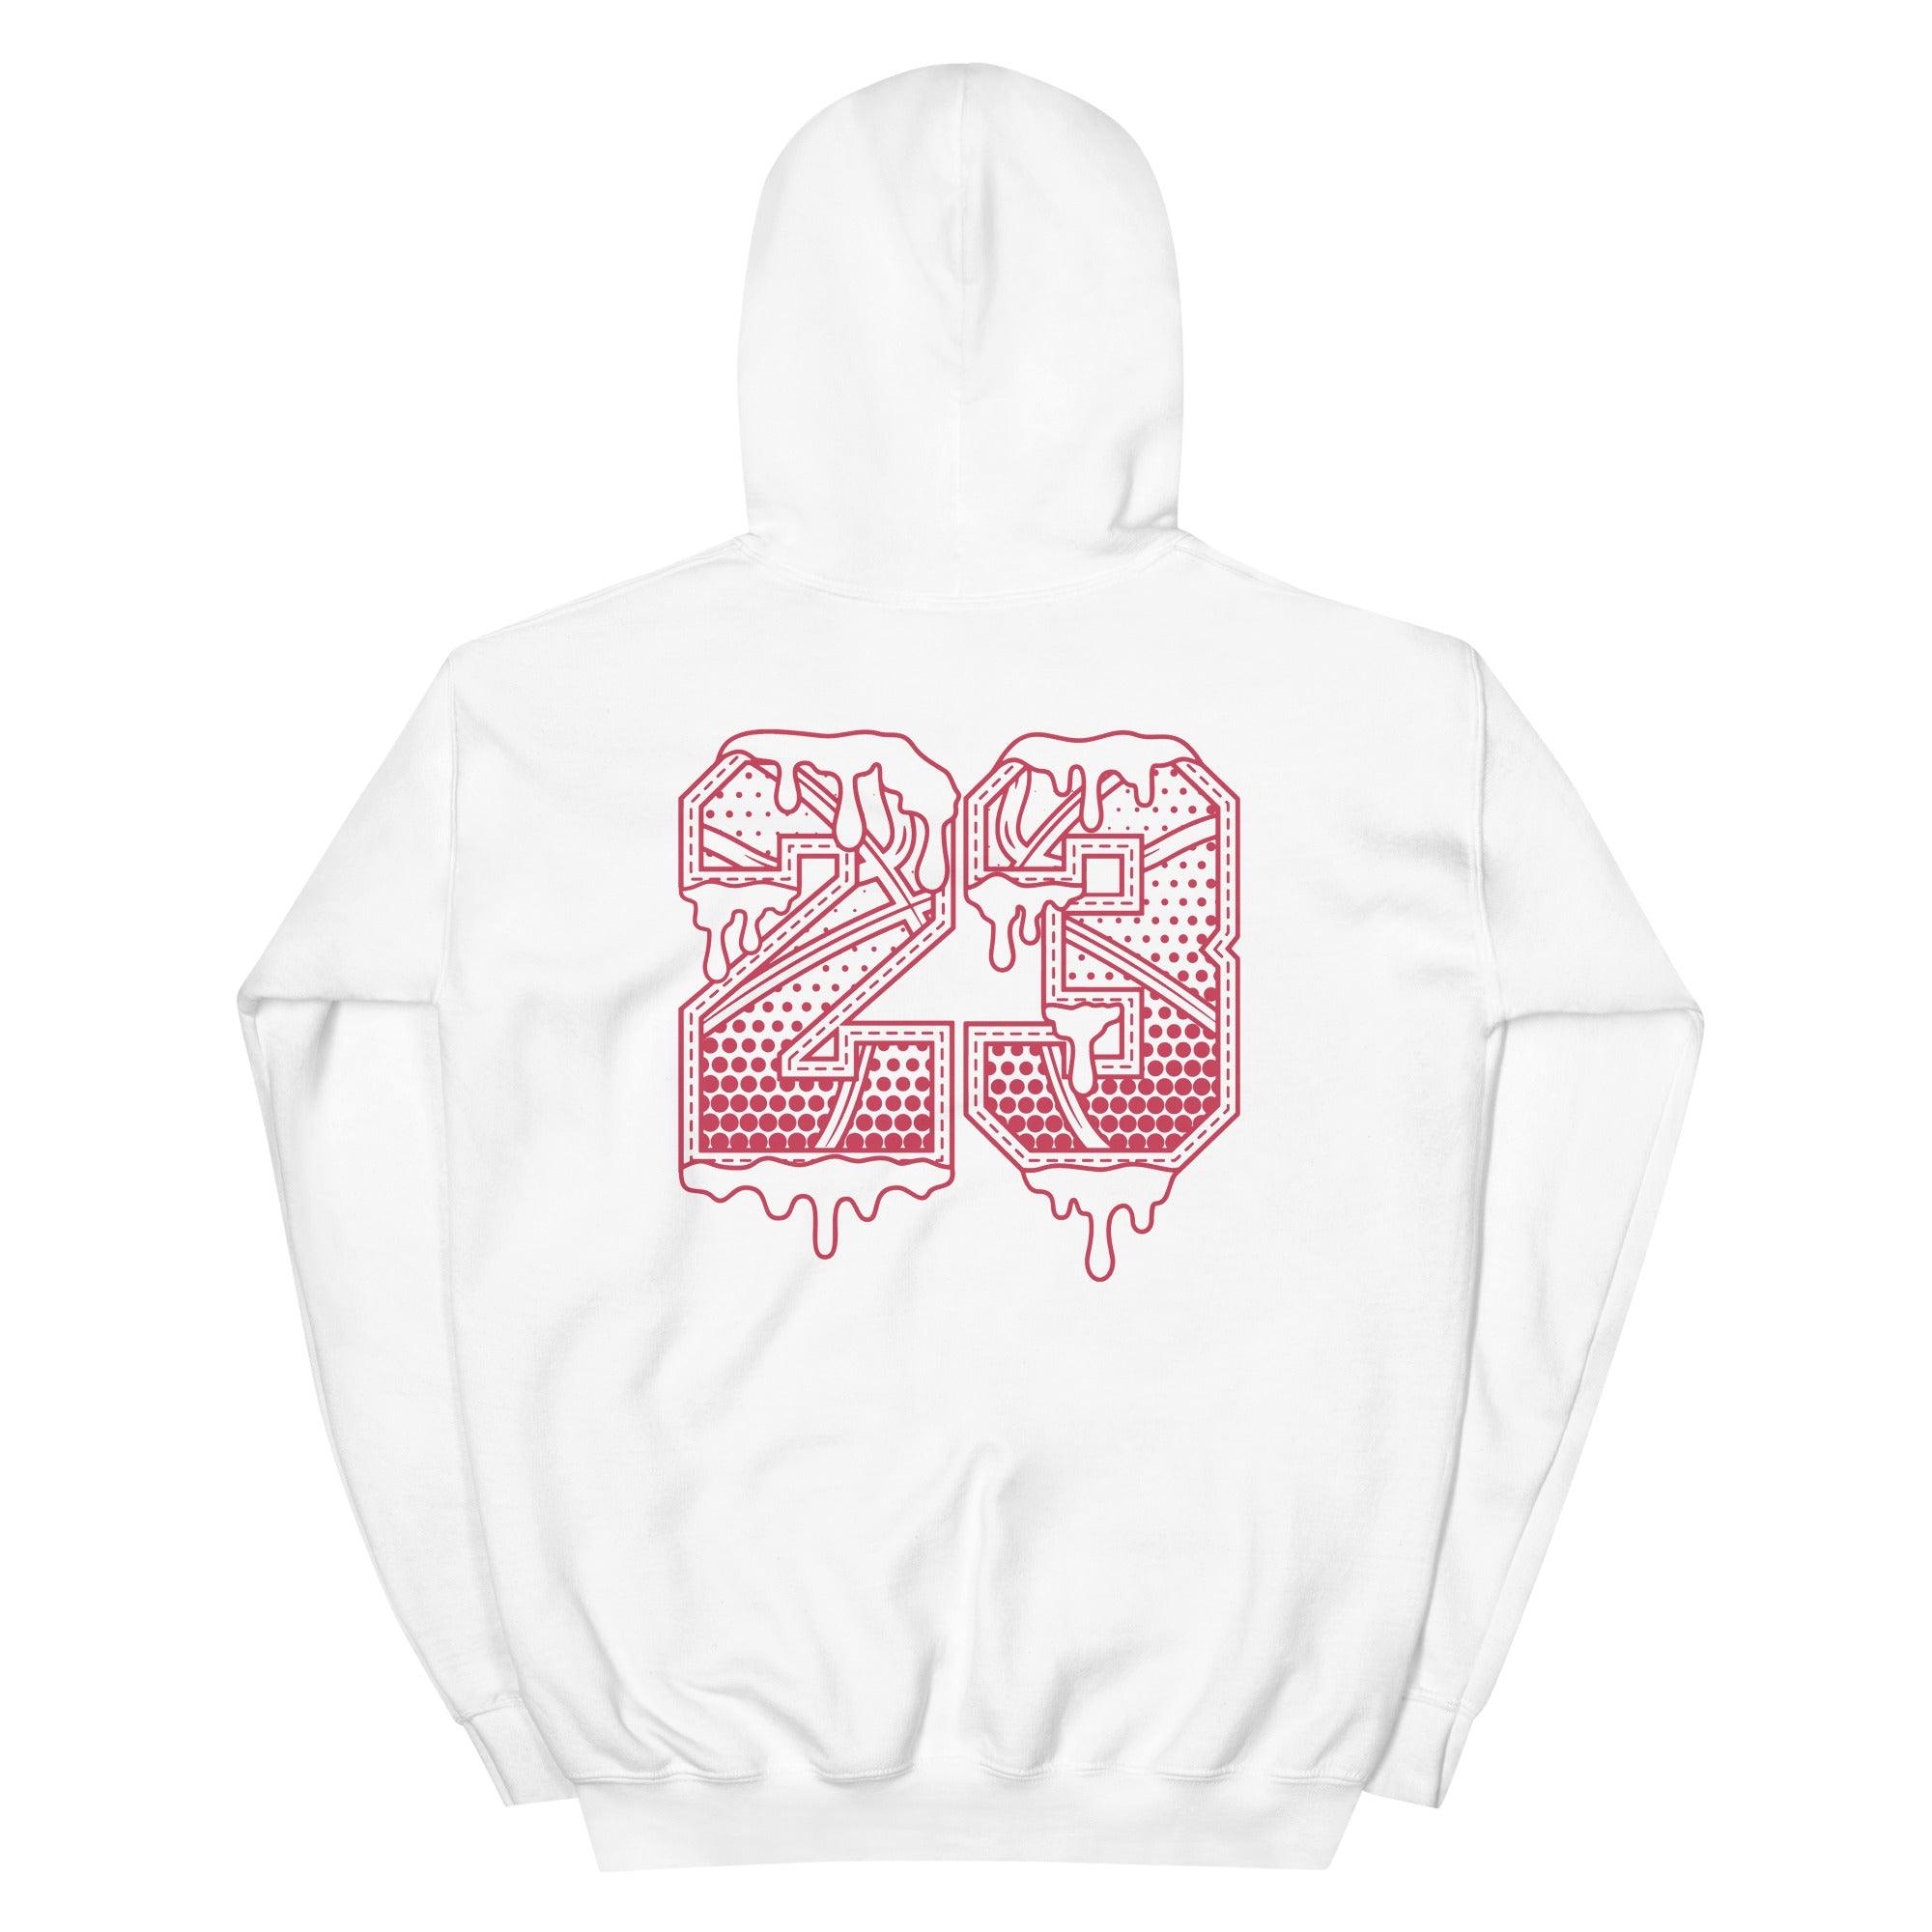 Number 23 Ball Hoodie Nike Dunk High Championship White Red photo